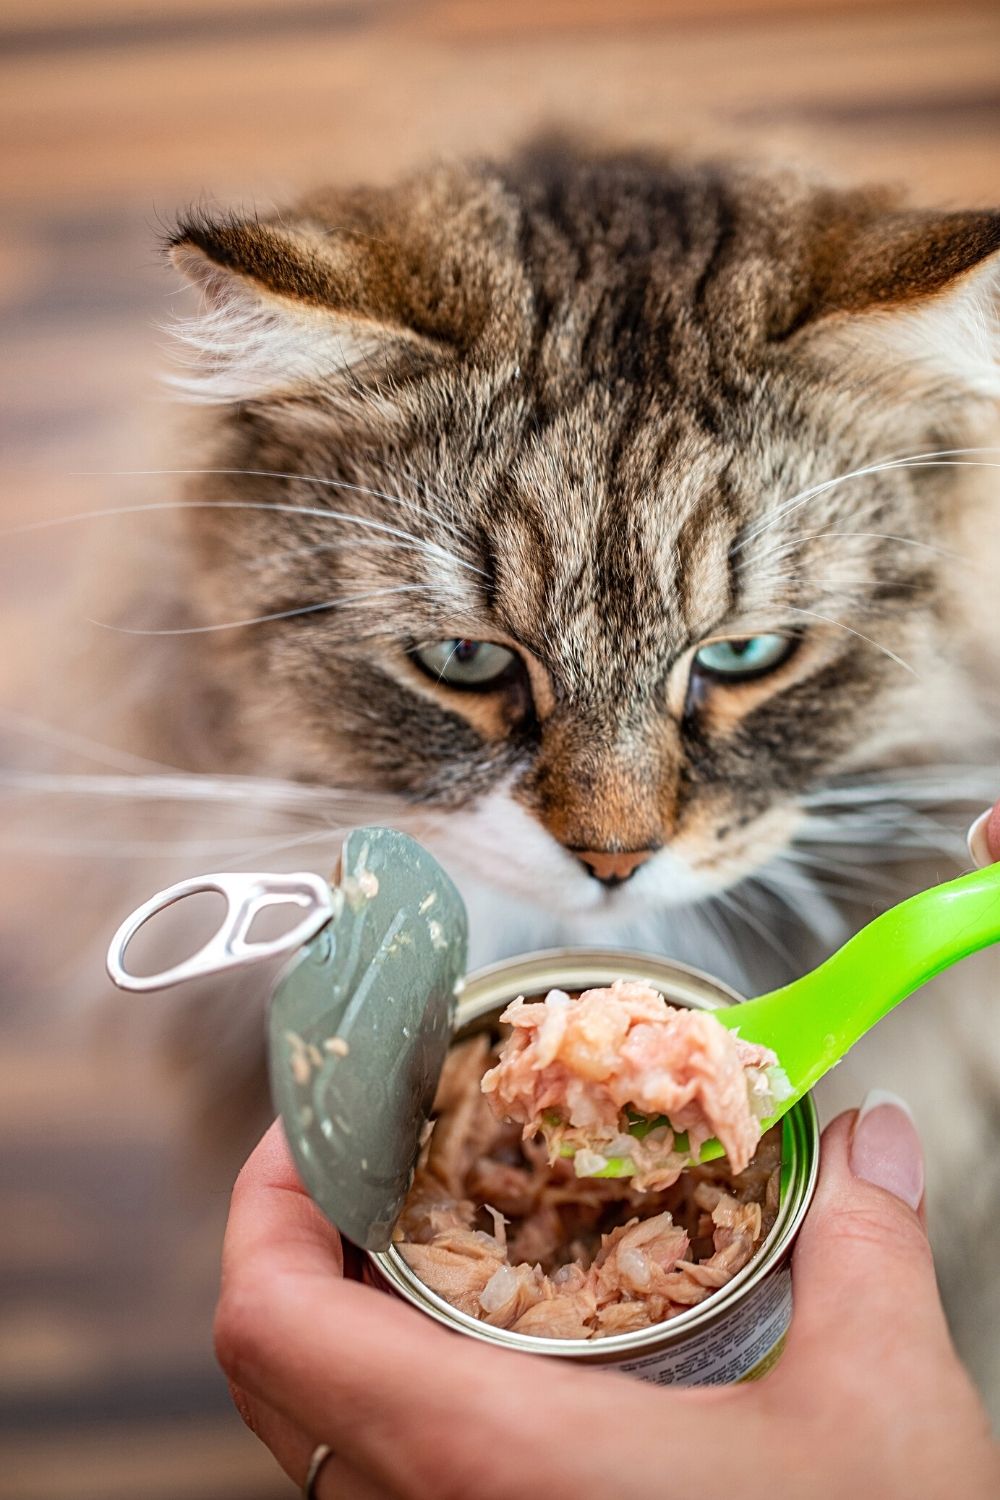 Canned fish is a popular option among cat owners in feeding their felines due to its benefits